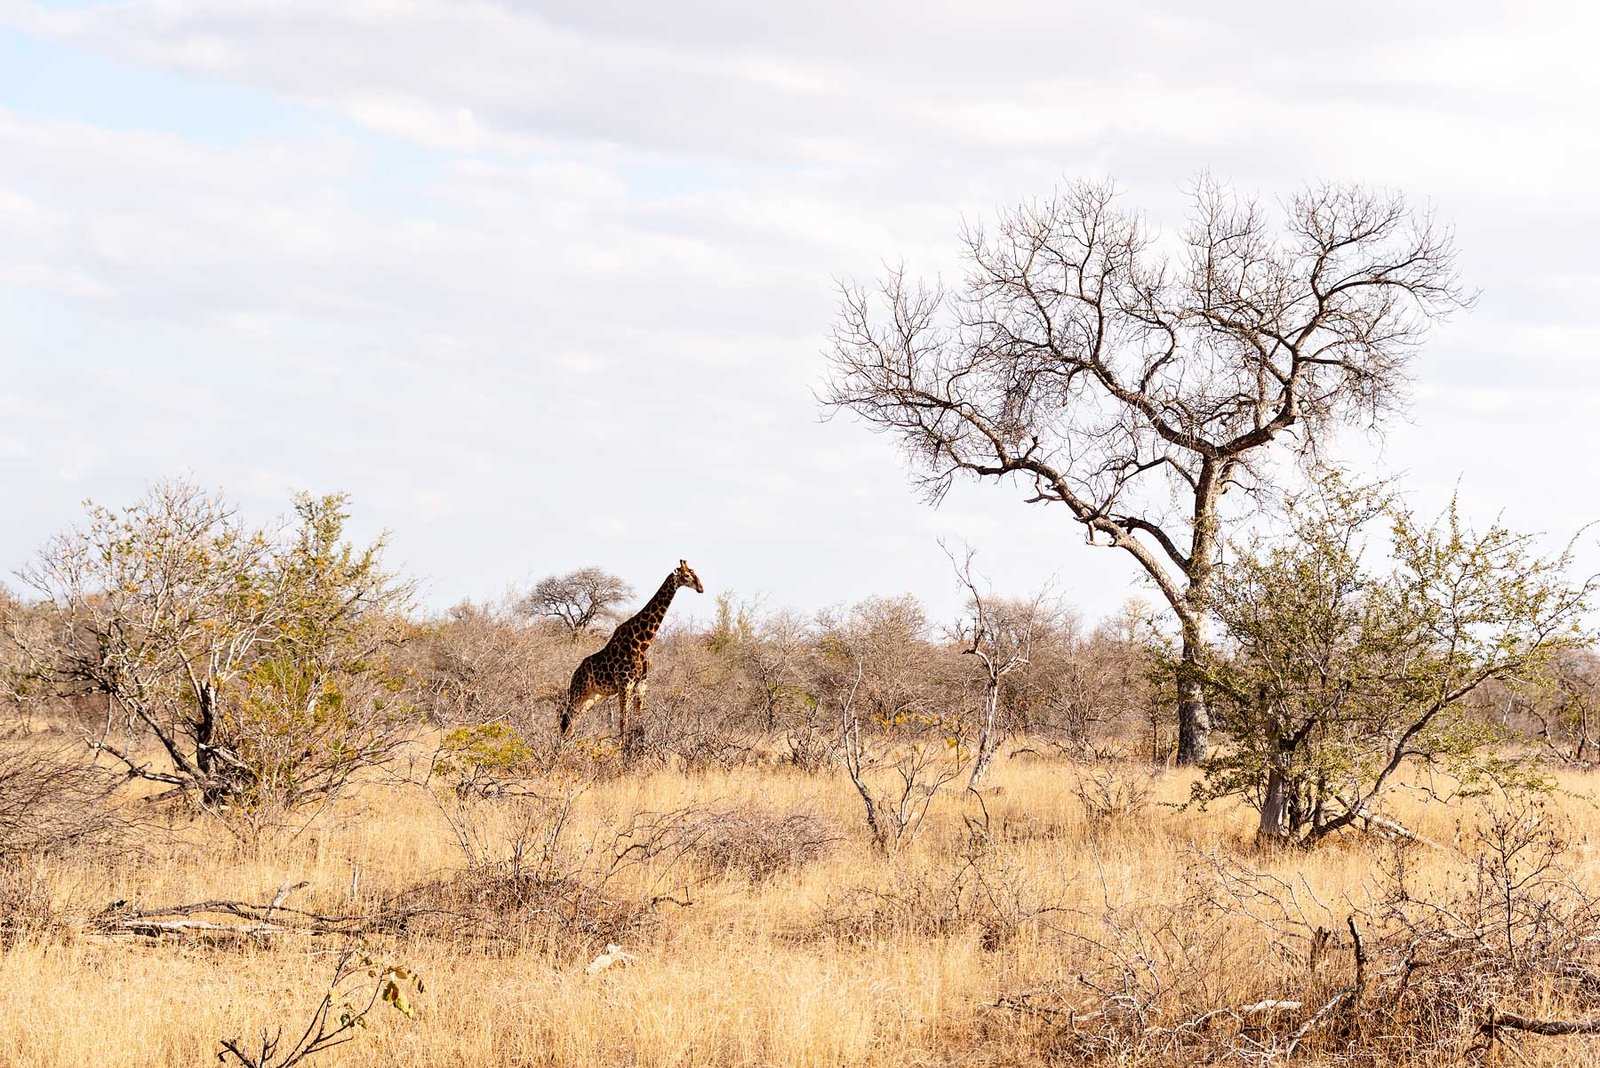 Giraffe in South Africa - - Check out my review of staying at Klaserie Sands River Camp, a beautiful boutique (4 suites), luxury safari lodge in Greater Kruger (Big 5), South Africa